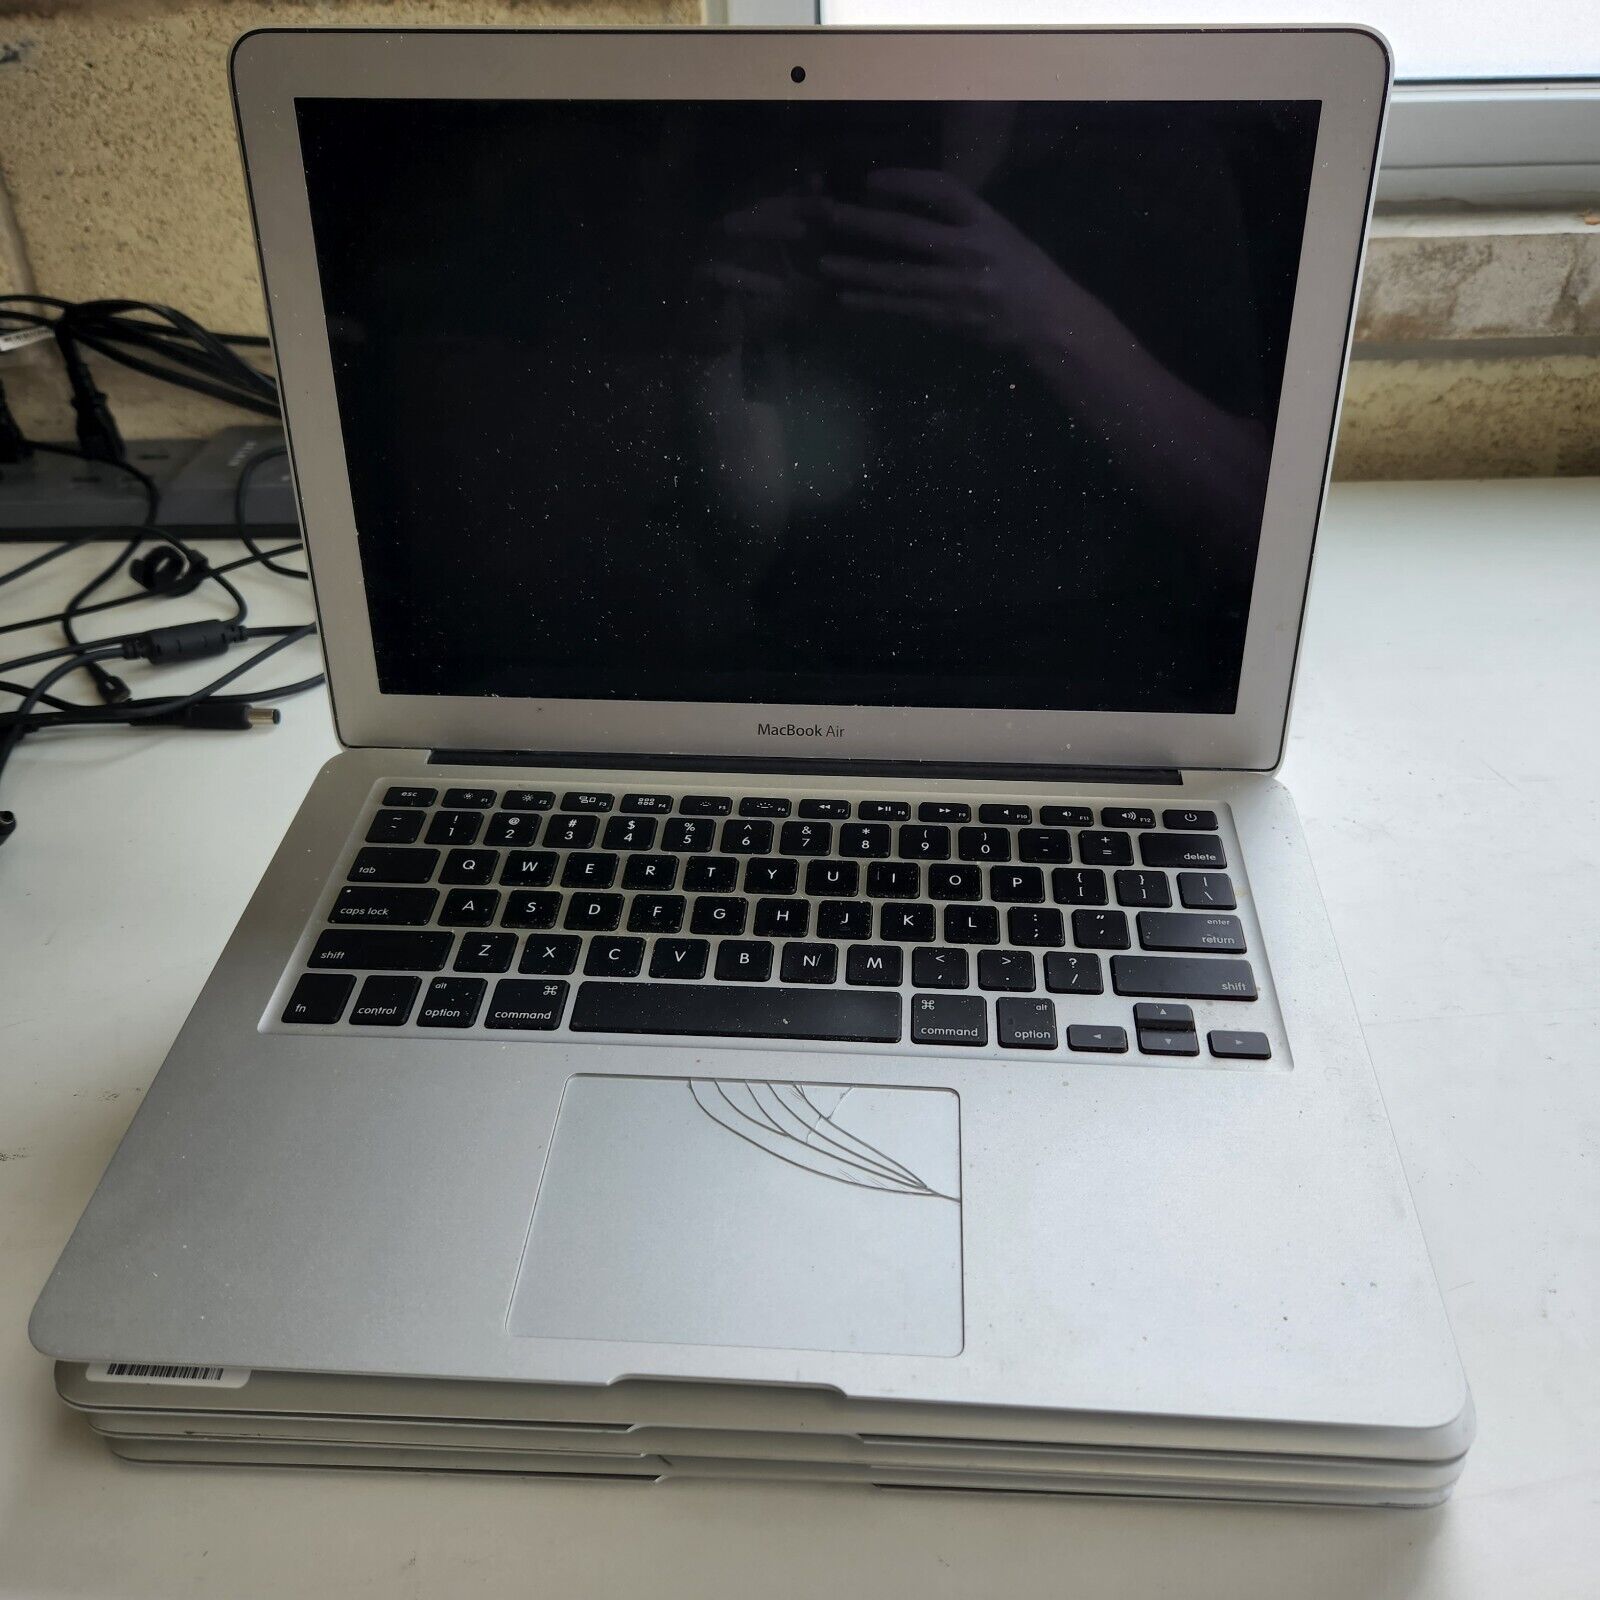 Lot of 4 Apple Macbook Air Model A1466 For Parts or Repair, No HDD, Untested